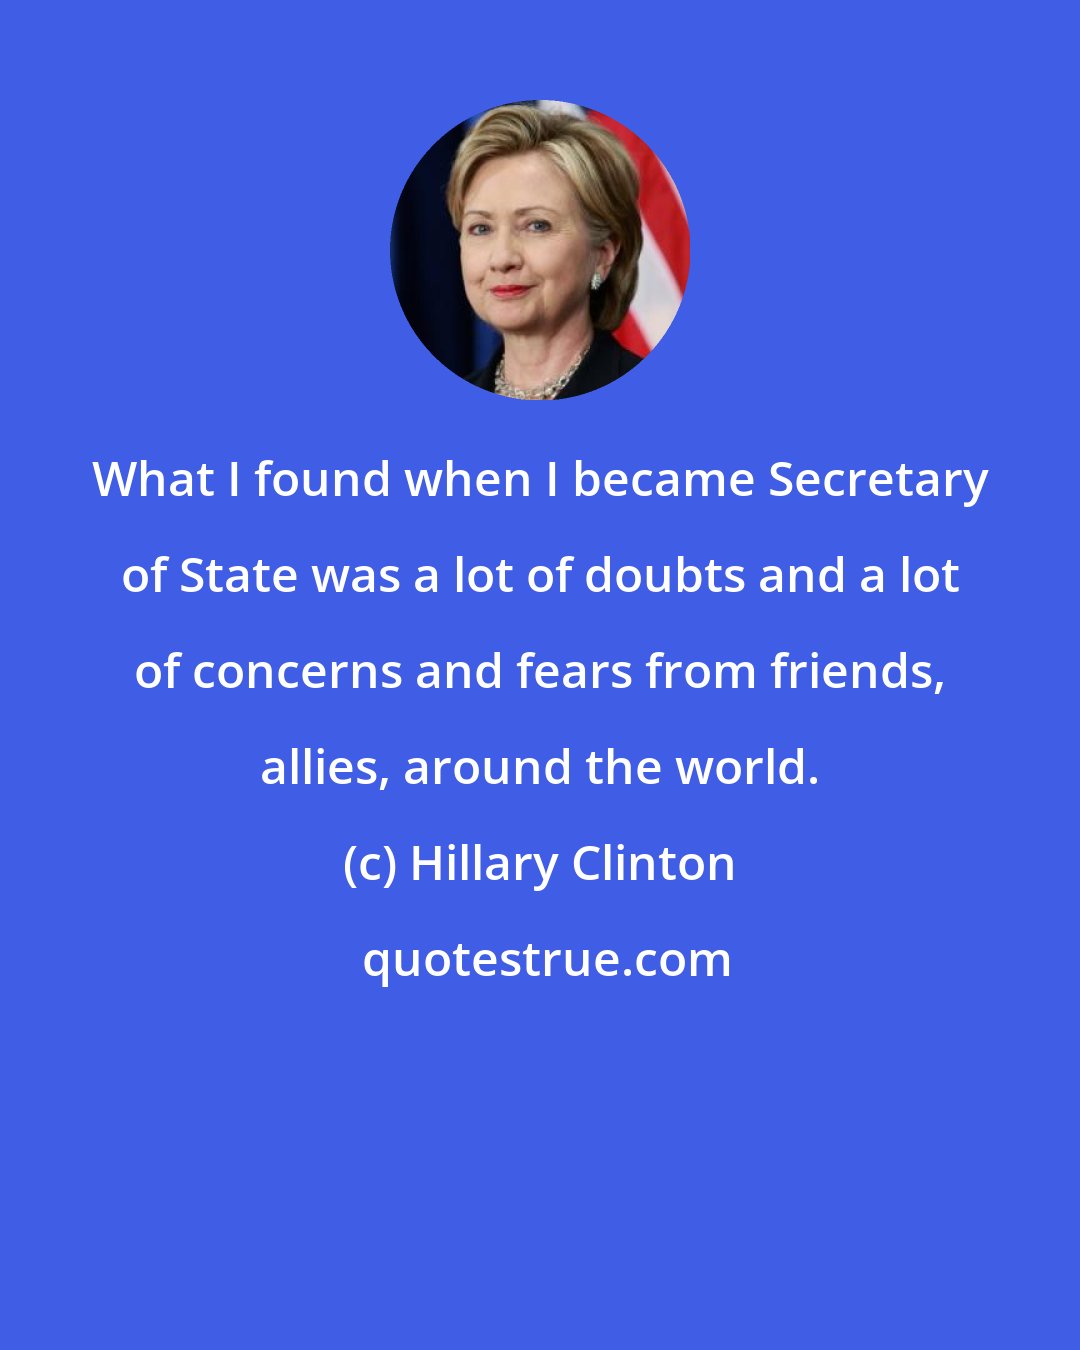 Hillary Clinton: What I found when I became Secretary of State was a lot of doubts and a lot of concerns and fears from friends, allies, around the world.